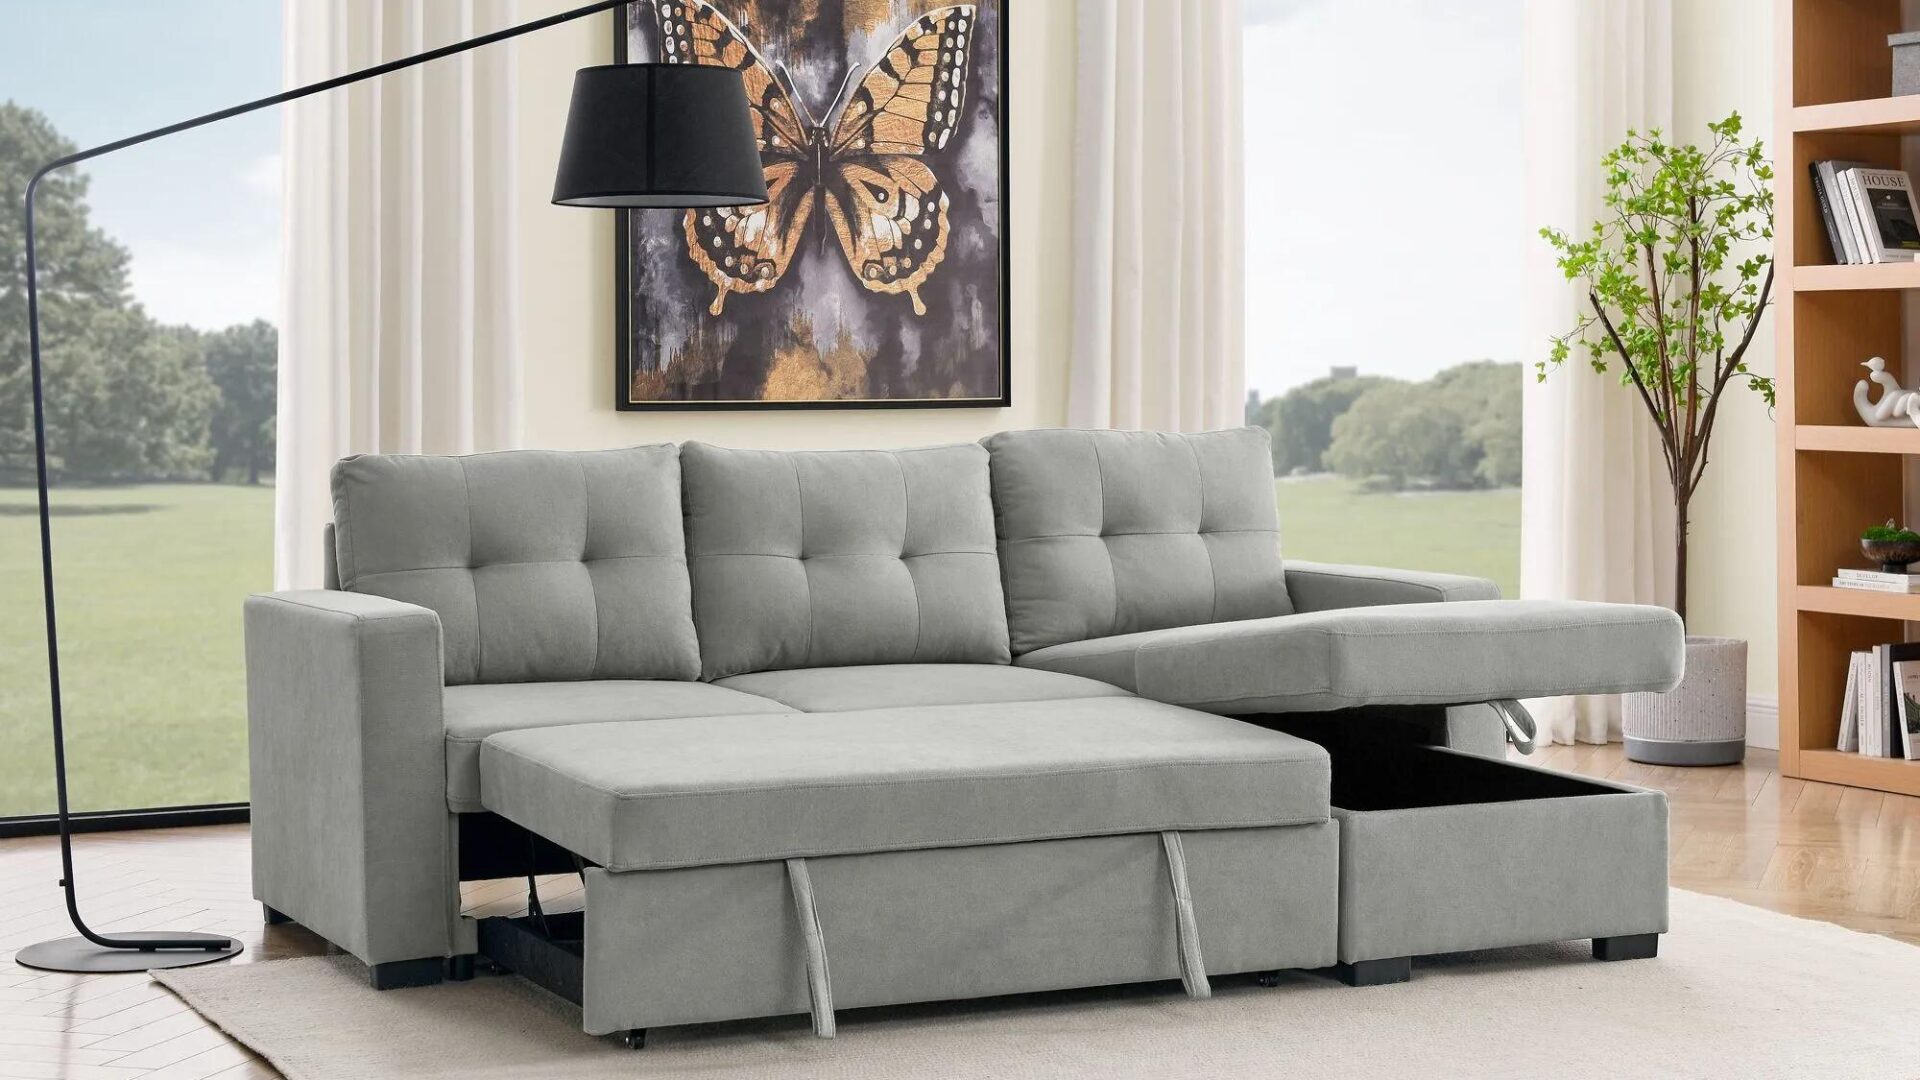 Why Are Sofa Beds the Must Have Furniture for Your Home